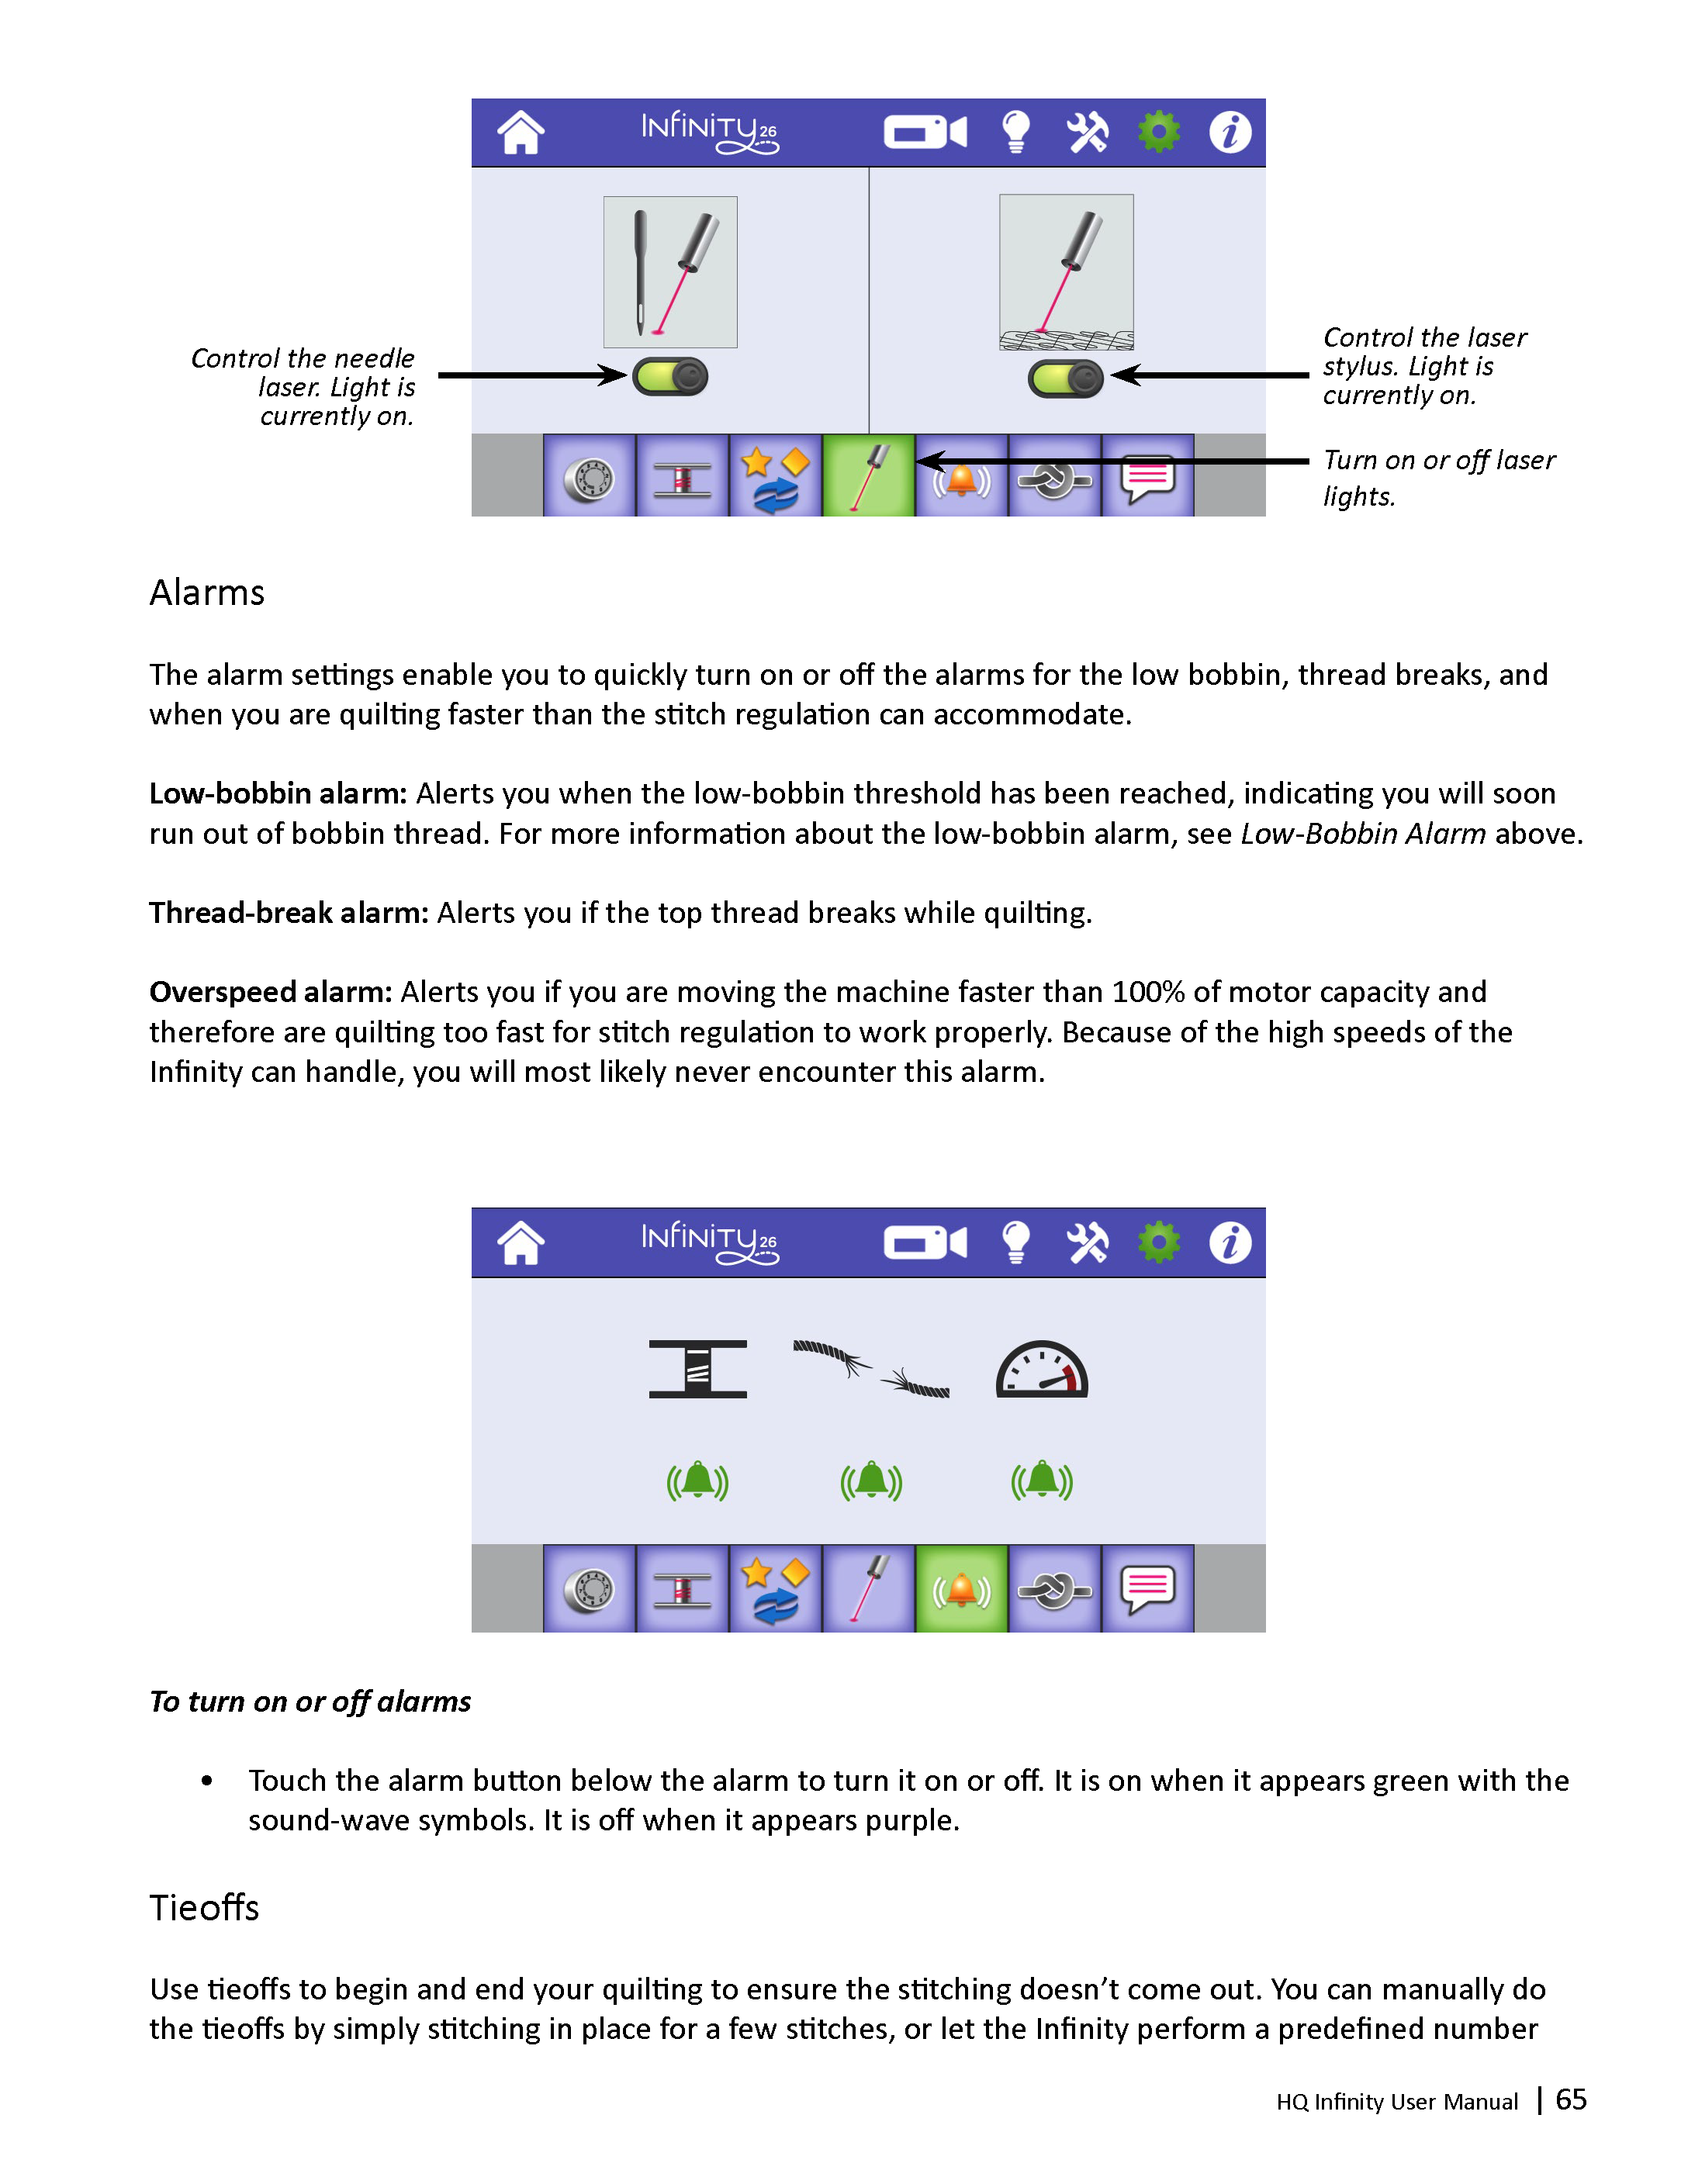 QM33001-HQ-Infinity-User-manual-version-1.4-ALL-Web-1_Page_66.png